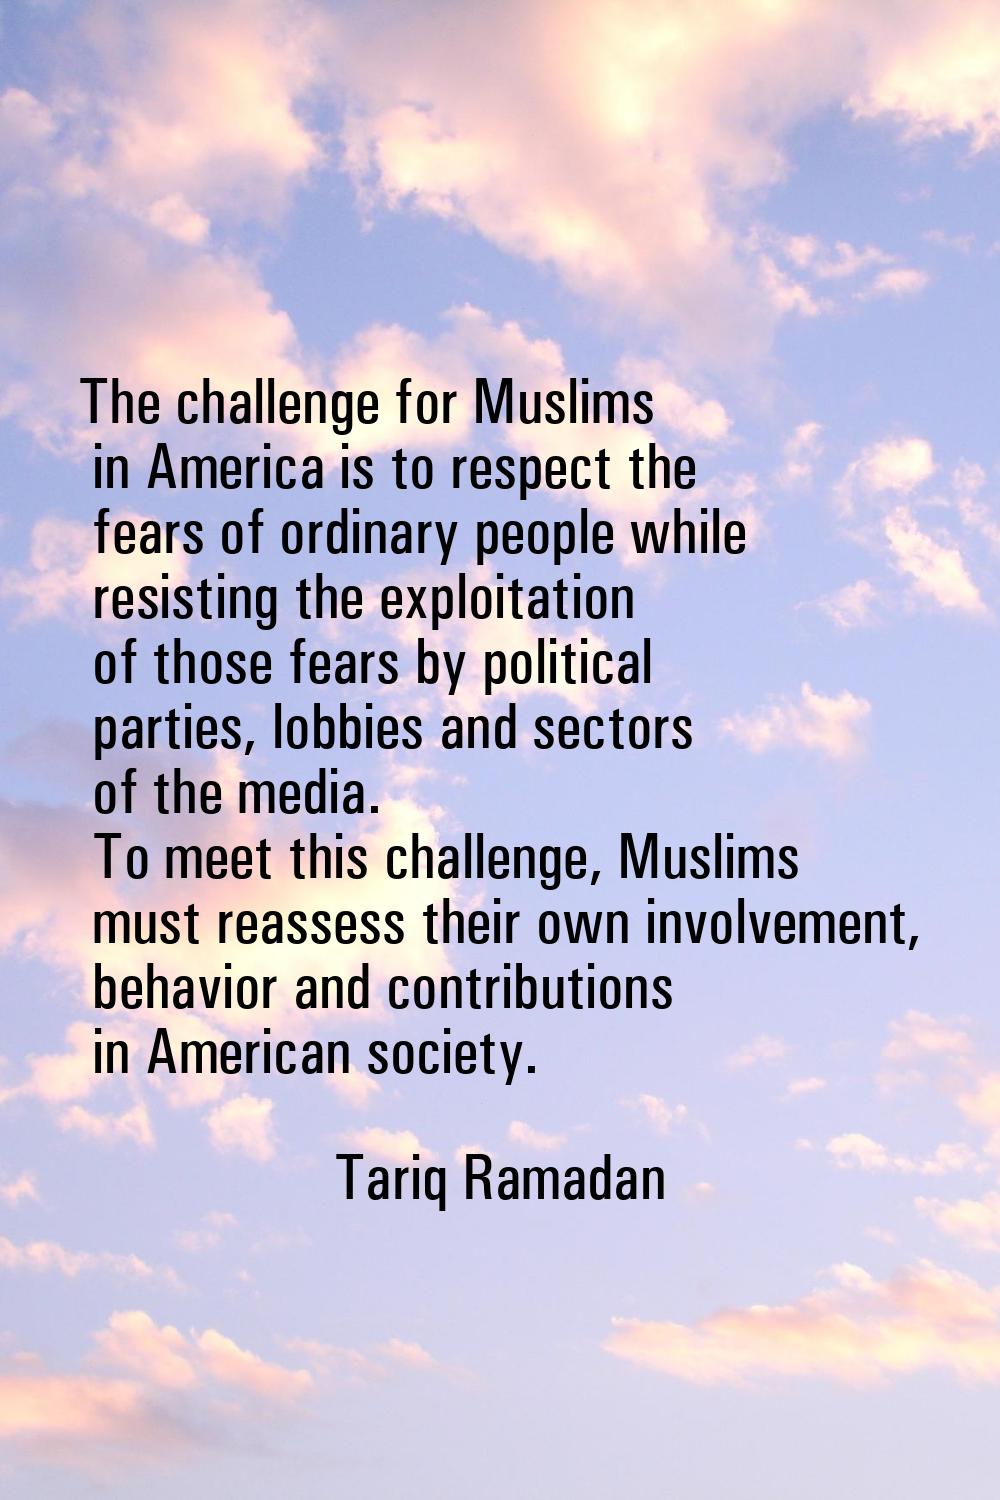 The challenge for Muslims in America is to respect the fears of ordinary people while resisting the